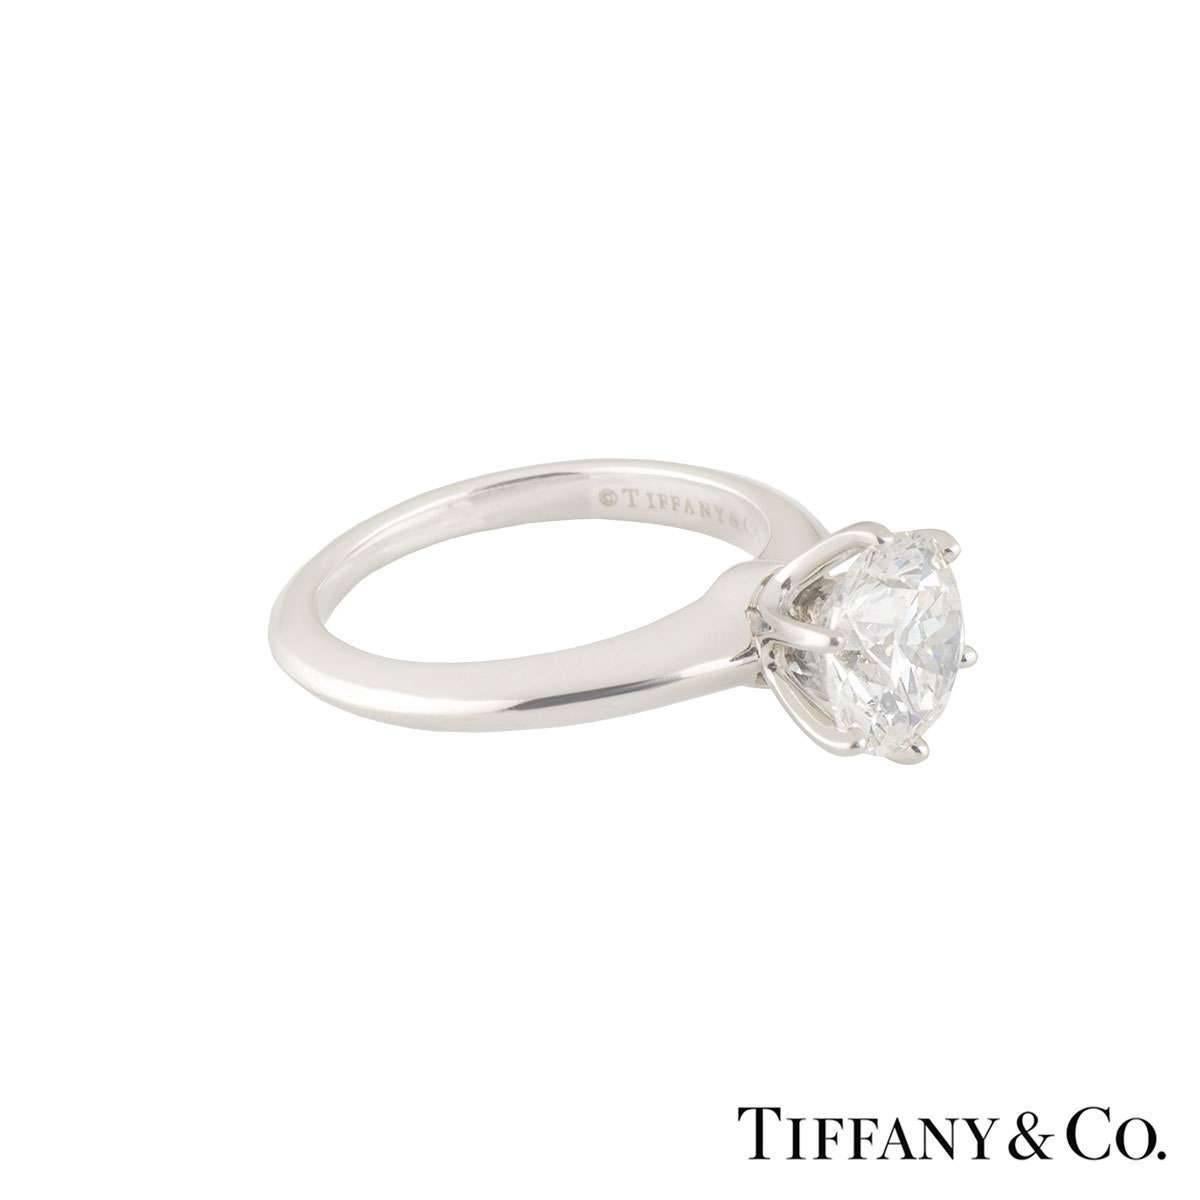 A beautiful Tiffany & Co. diamond engagement ring from The Tiffany Setting Band collection. The ring comprises of a round brilliant cut diamond in a prong setting with a weight of 1.76ct, H colour and VS2 clarity. The diamond scores an excellent